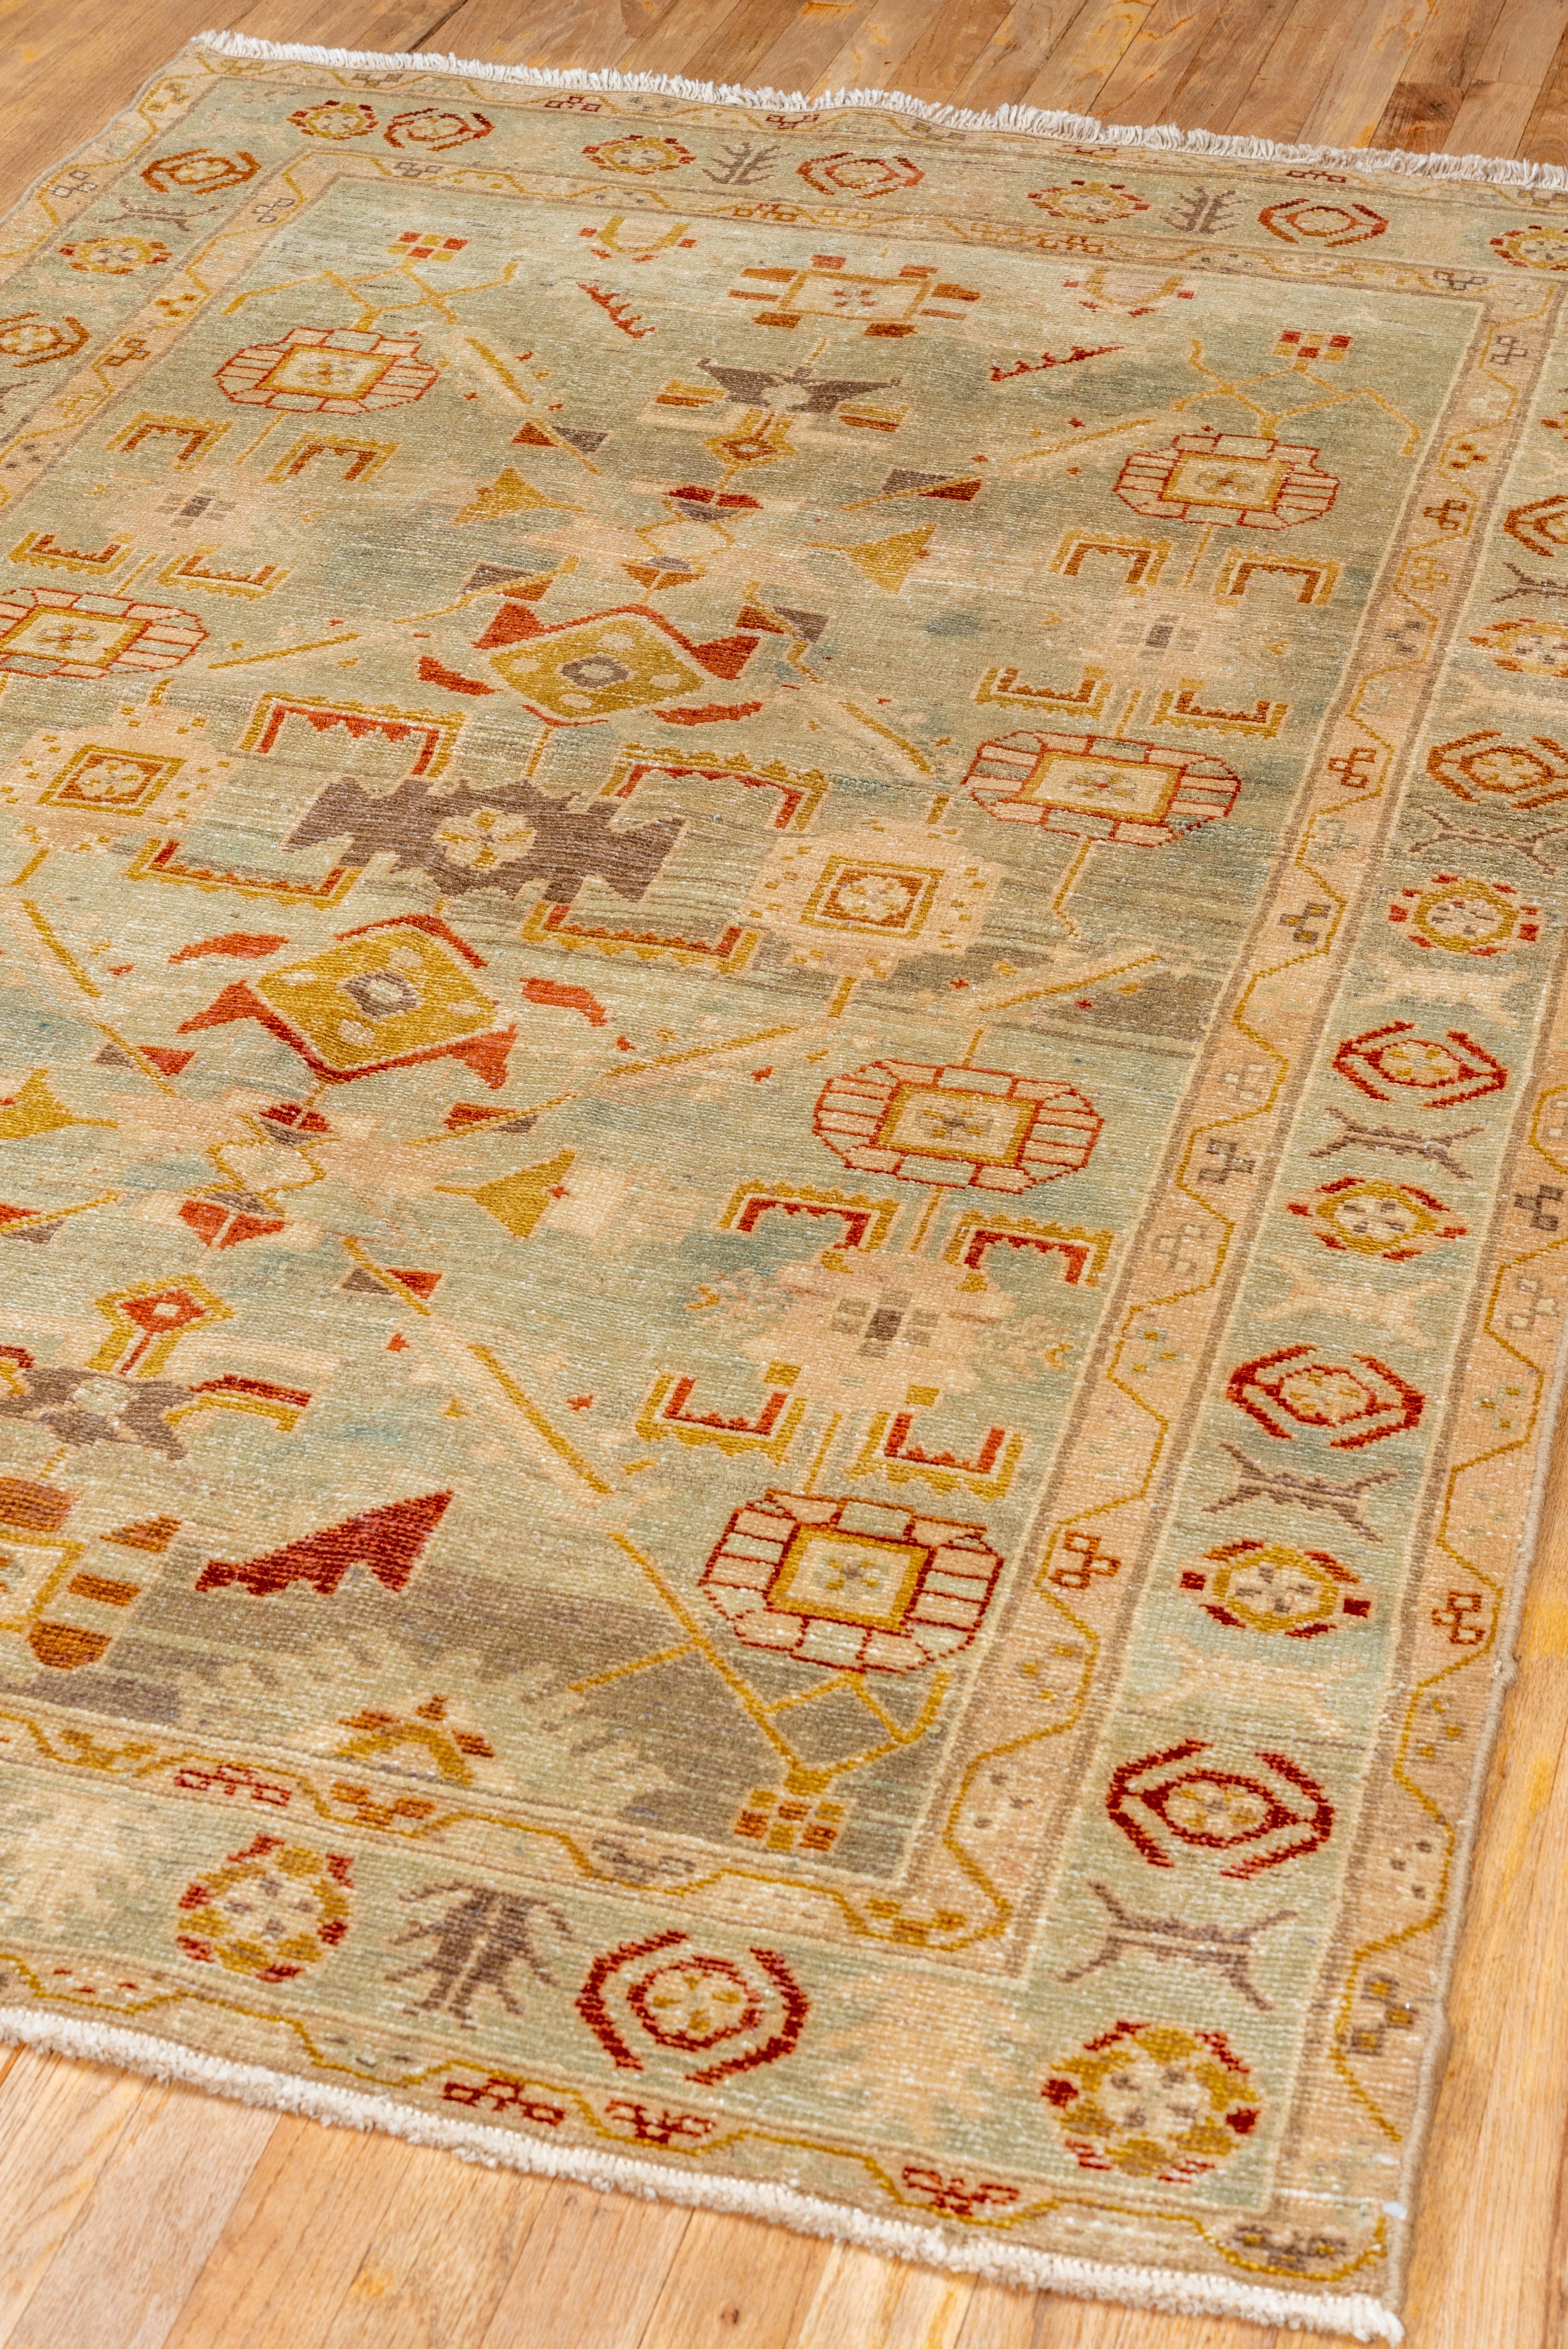 Stunning Antique Persian Malayer Rug, Seafoam Field & Borders, Mustard Accents In Good Condition For Sale In New York, NY